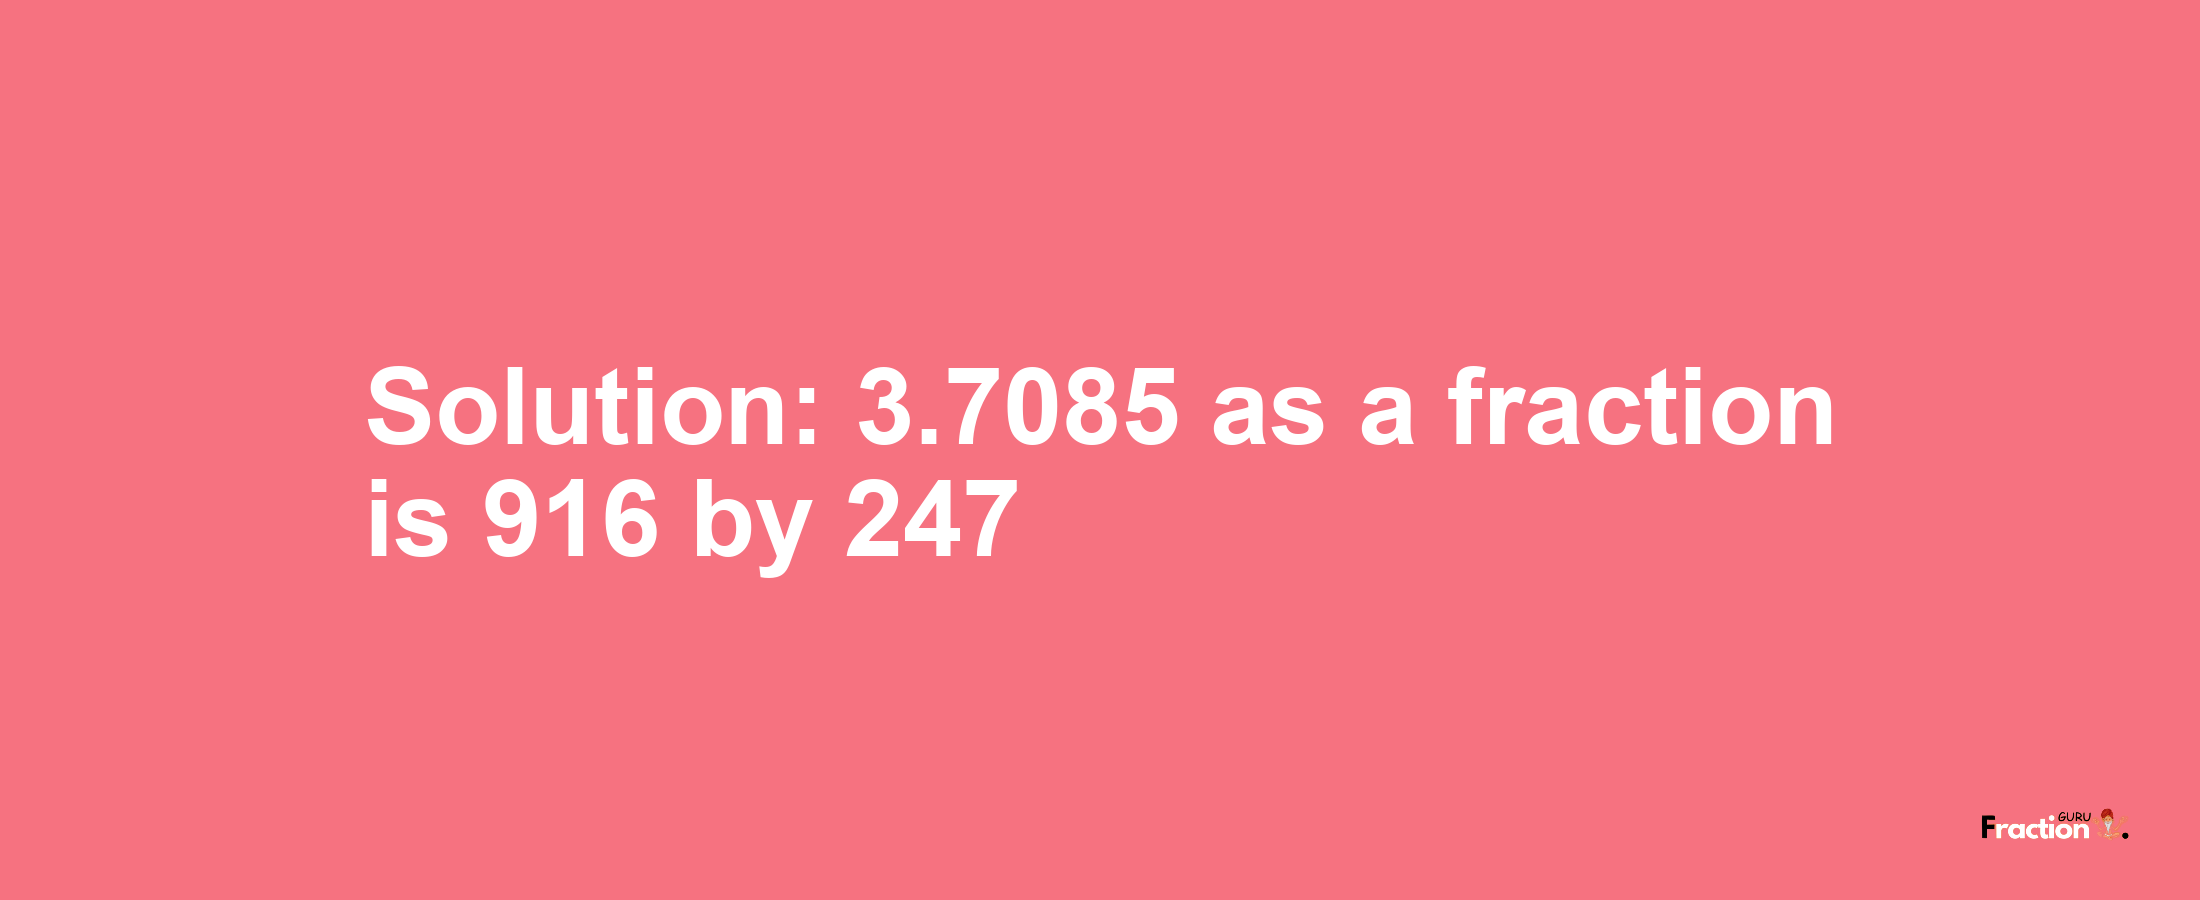 Solution:3.7085 as a fraction is 916/247